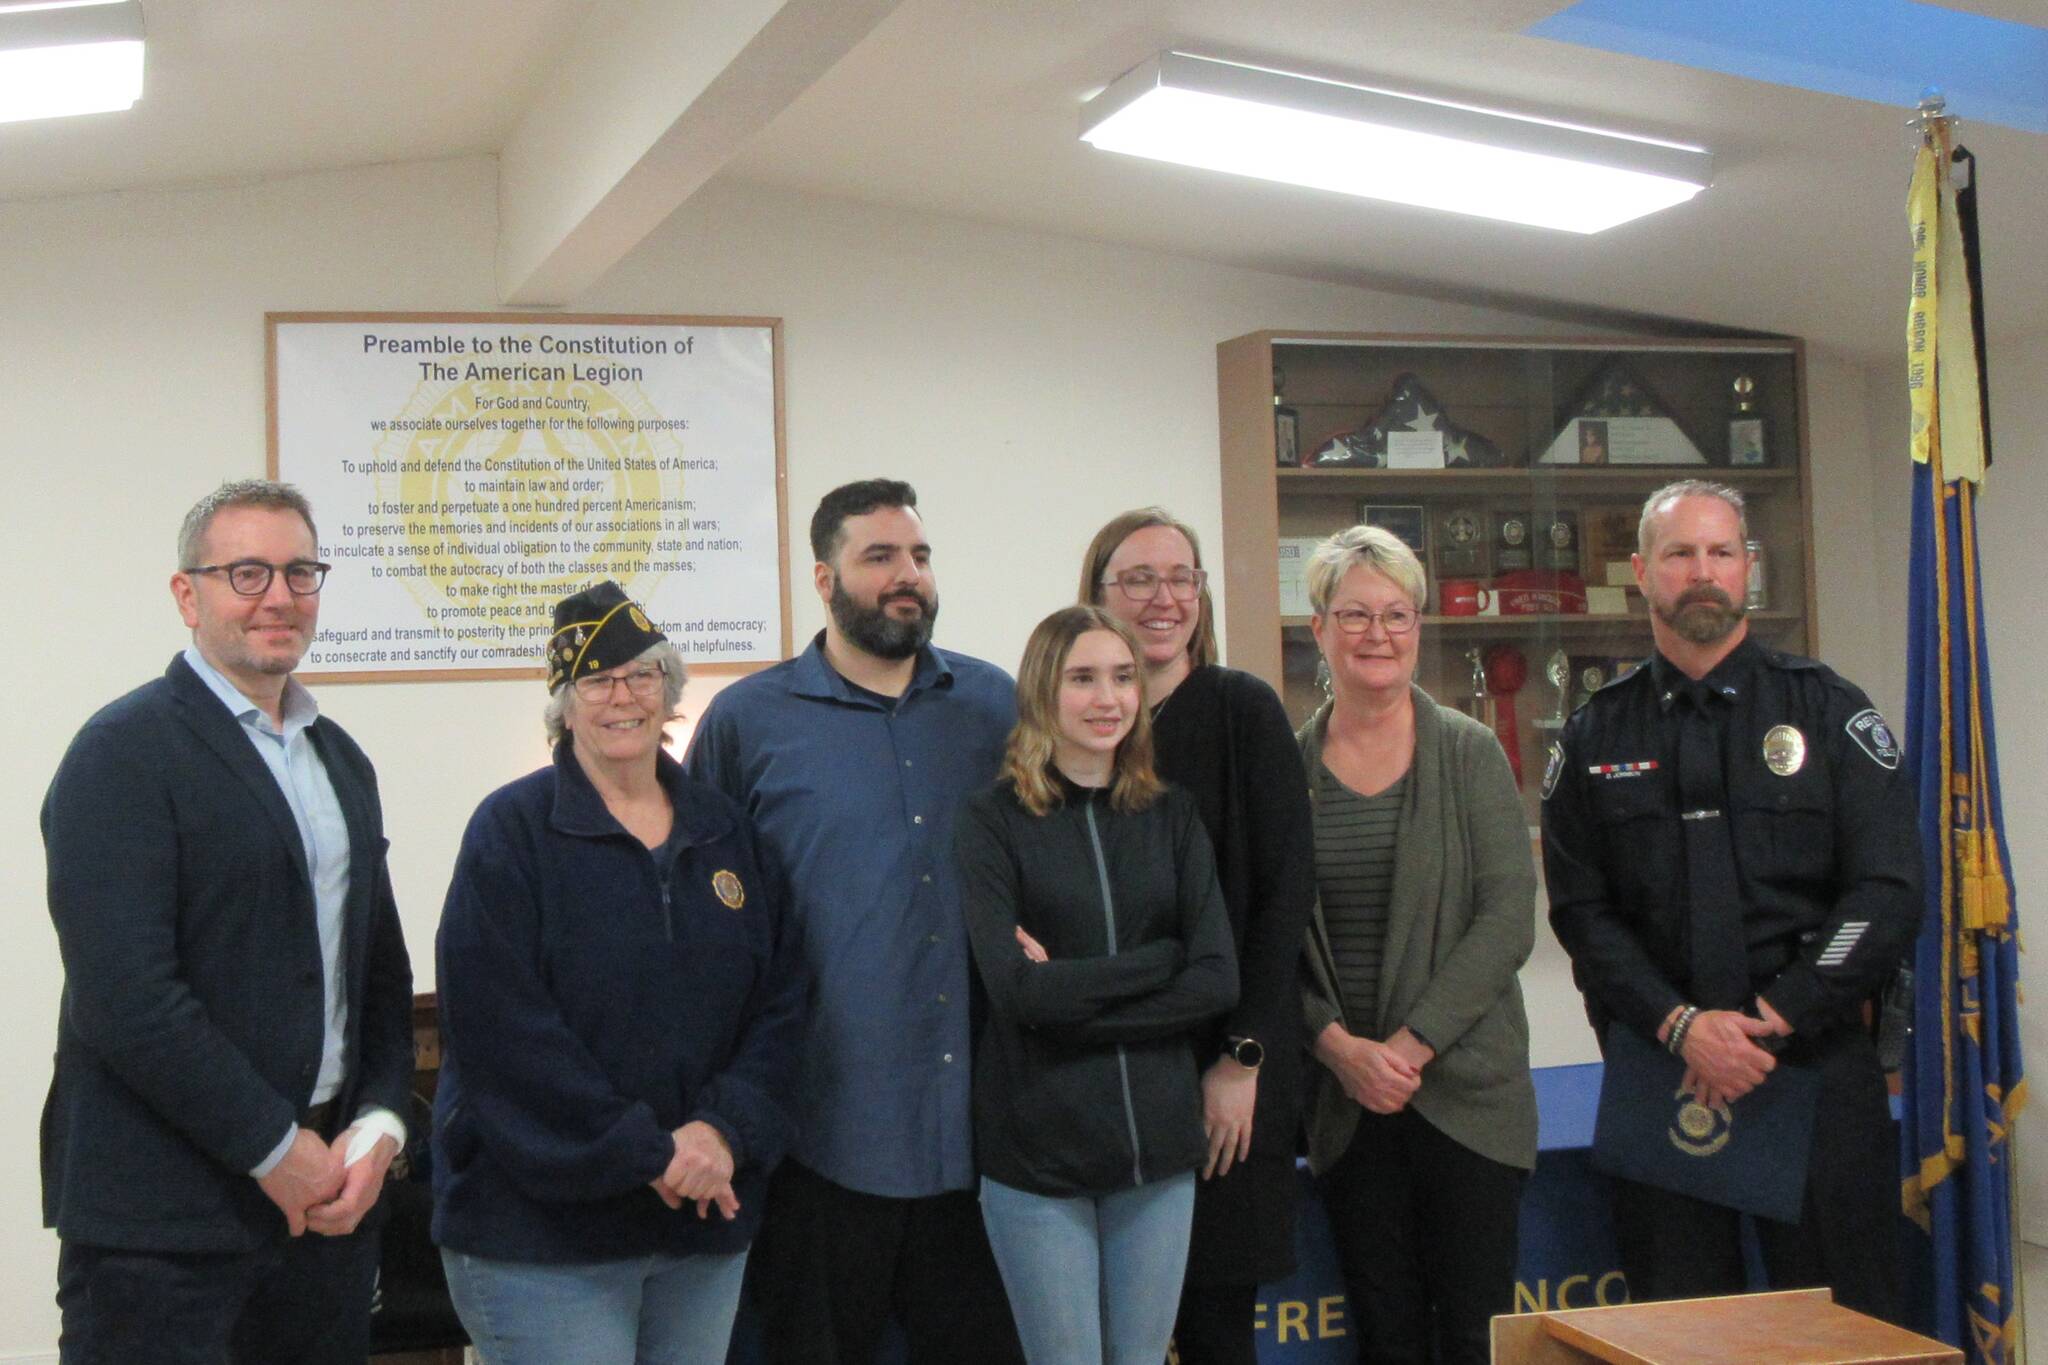 From left: Mayor Pavone, Post Commander Patty Reese, Eric Maestas, daughter Emaline, wife Brianna, Lora Ueland of Valley Communications and Officer Johnson. Courtesy photo